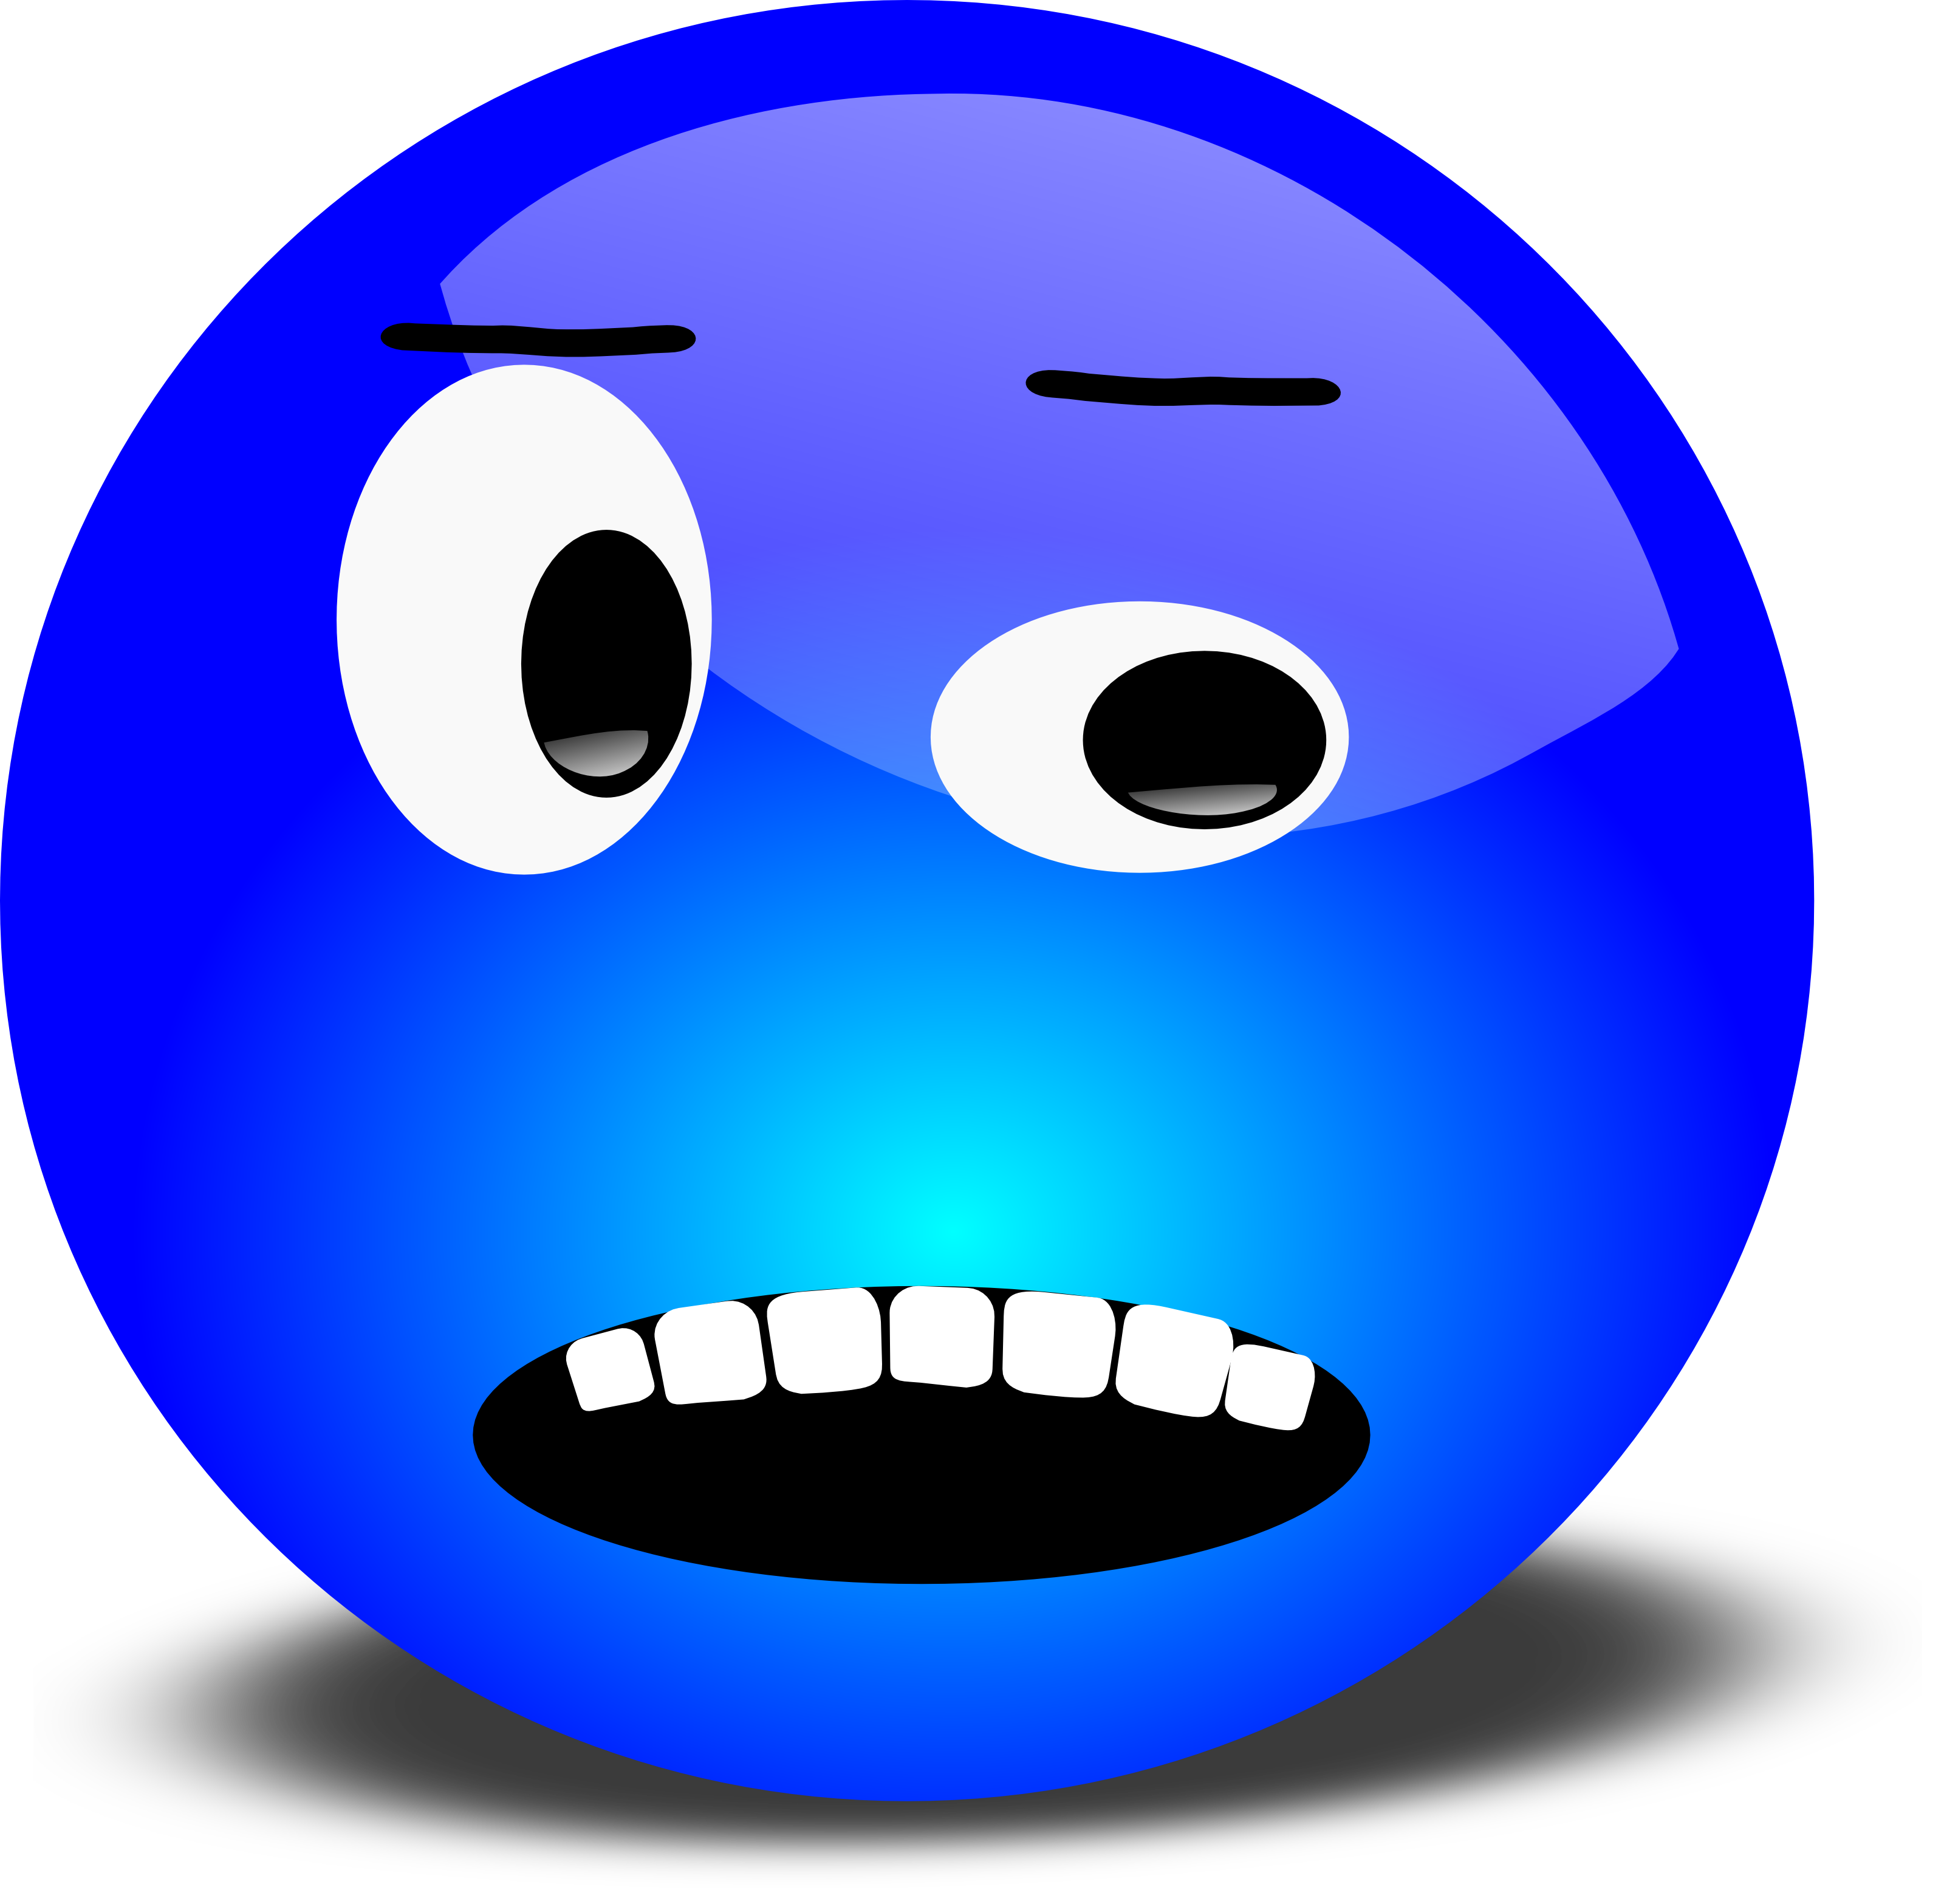 Free 3D Annoyed Smiley Face Clipart Illustration